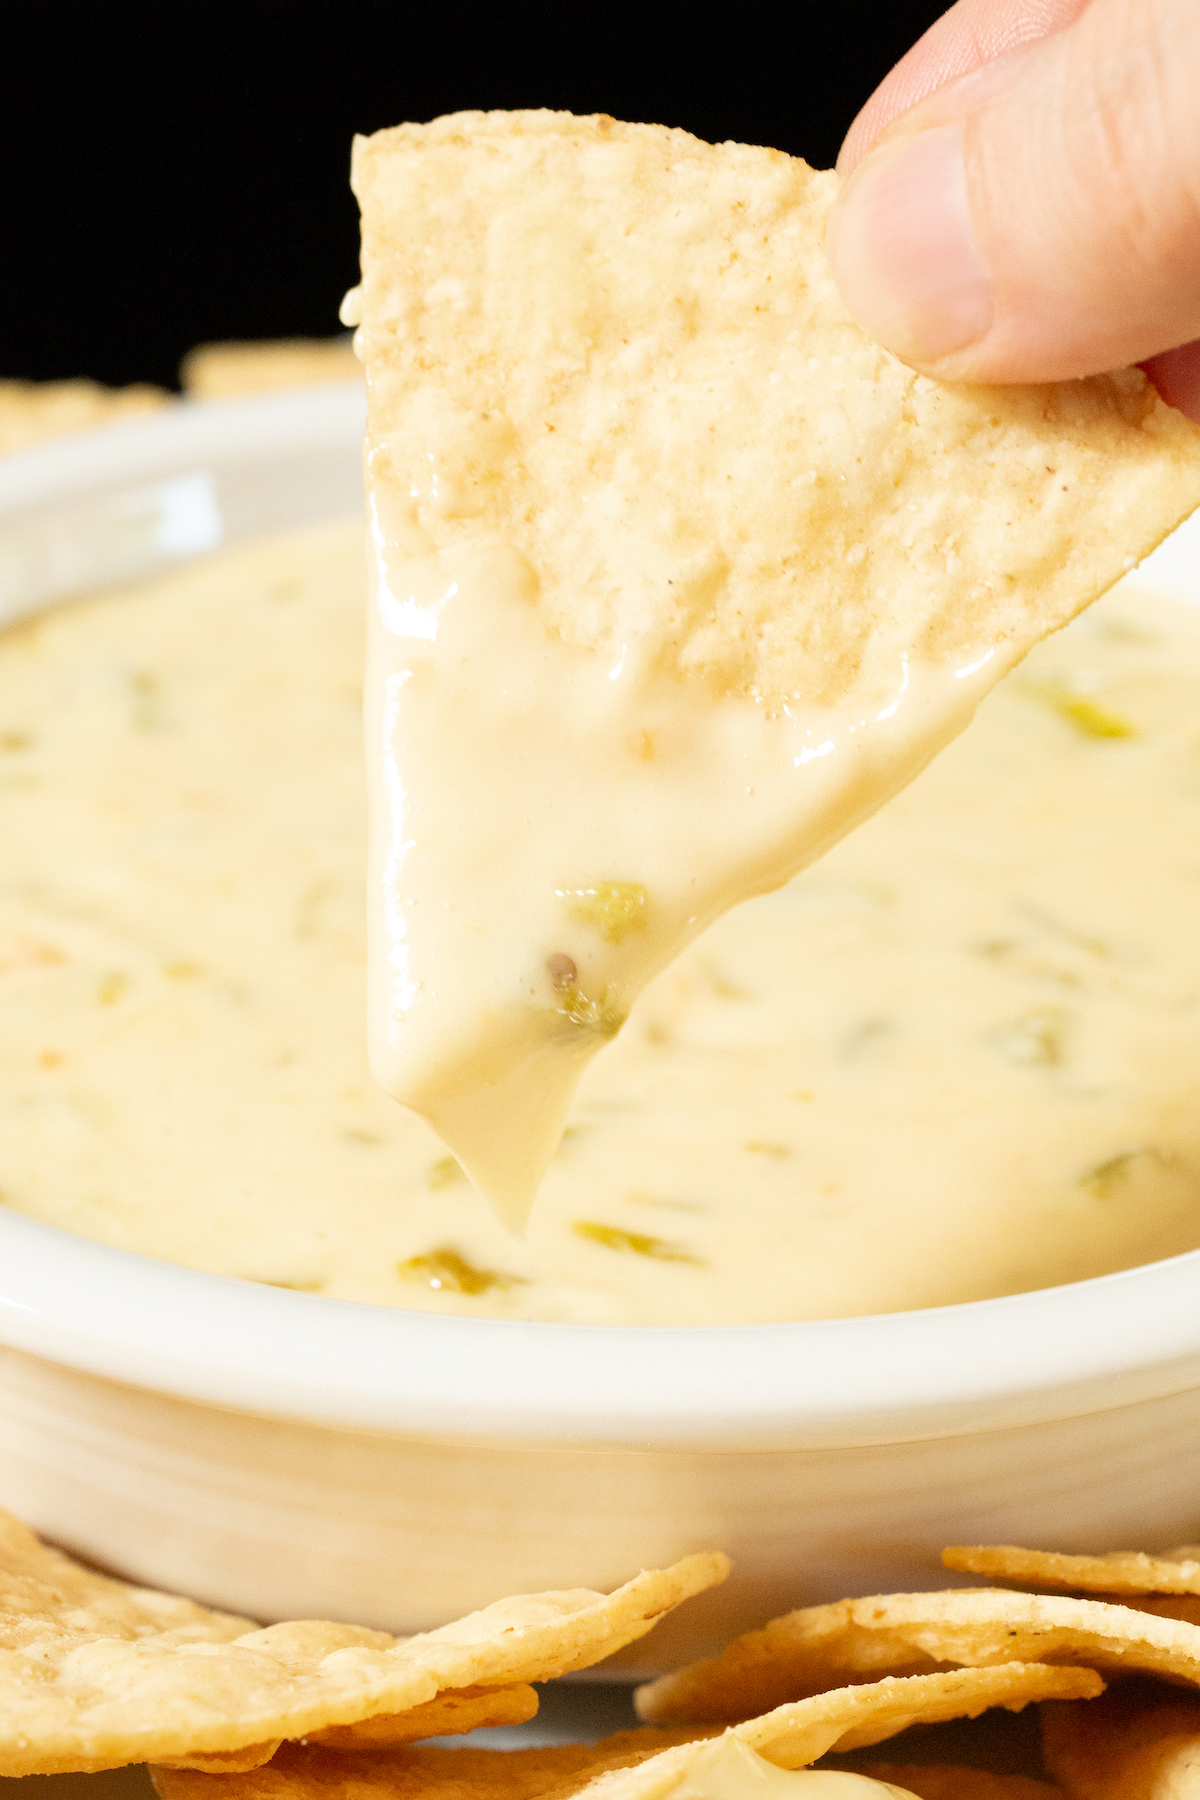 A hand holds up a tortilla chip that has been dipped in hatch chile queso. A bowl with the rest of the dip is out of focus in the background.